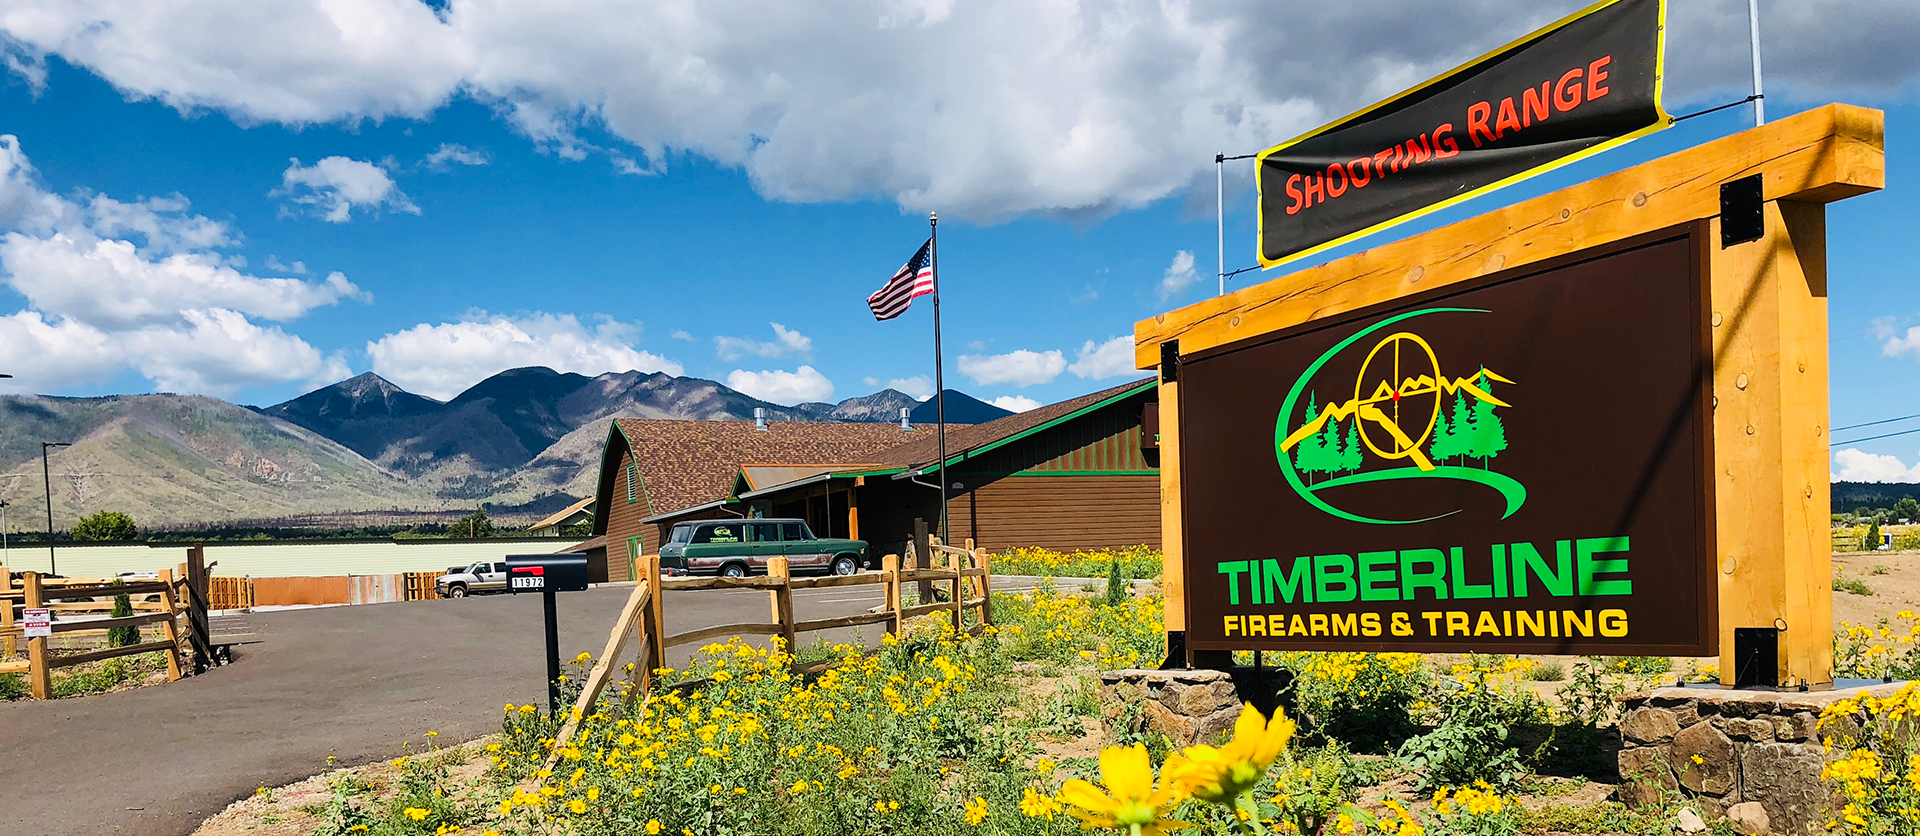 Timberline Firearms shooting range from the outside